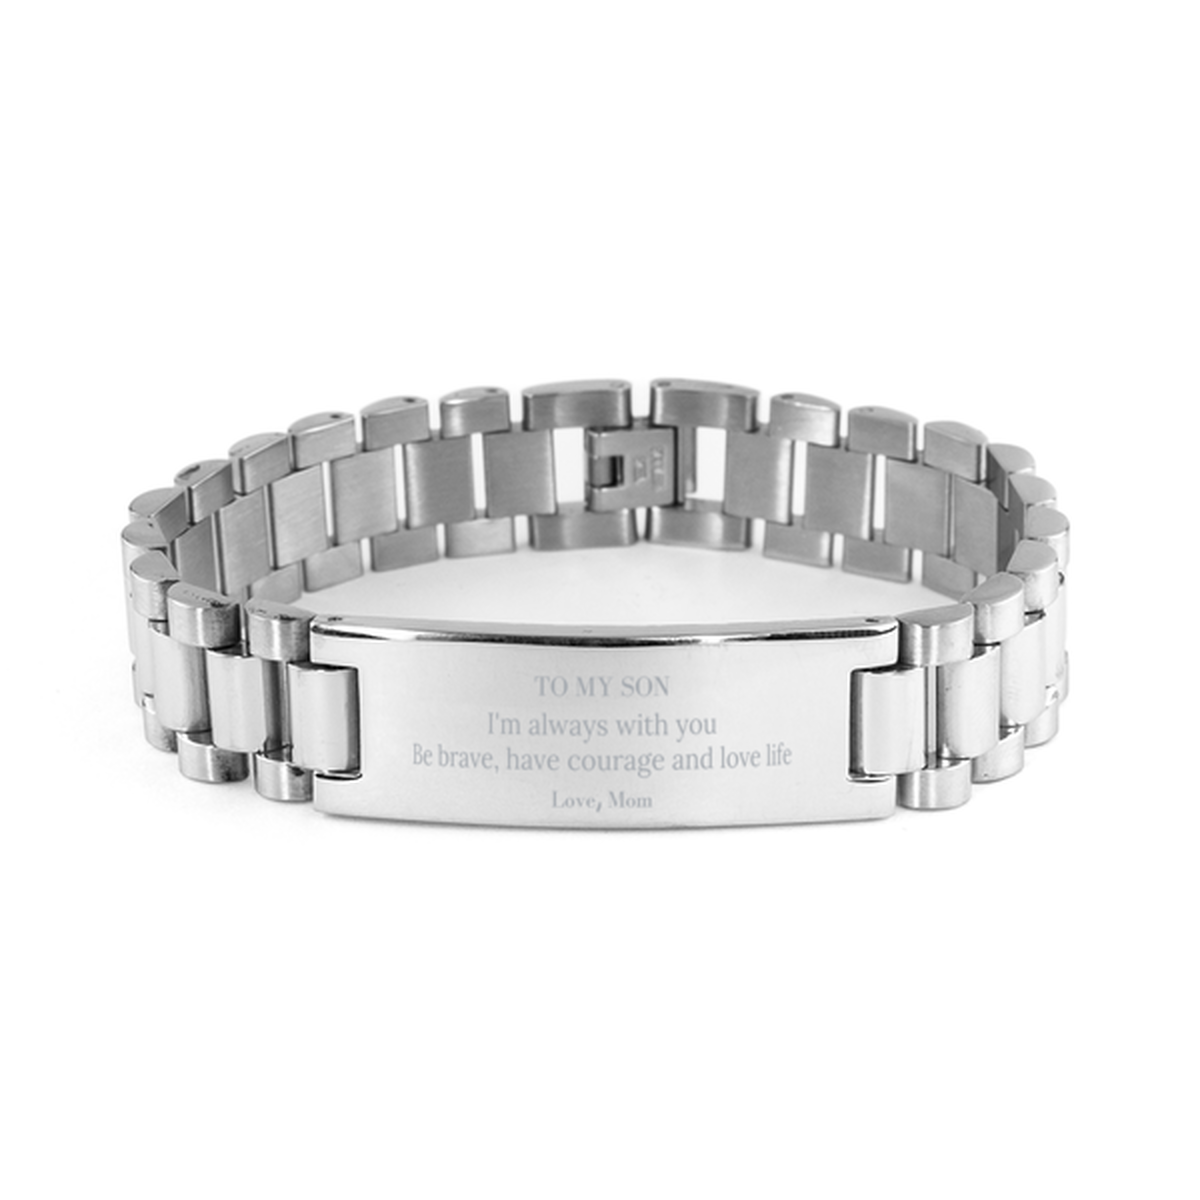 To My Son Gifts from Mom, Unique Ladder Stainless Steel Bracelet Inspirational Christmas Birthday Graduation Gifts for Son I'm always with you. Be brave, have courage and love life. Love, Mom